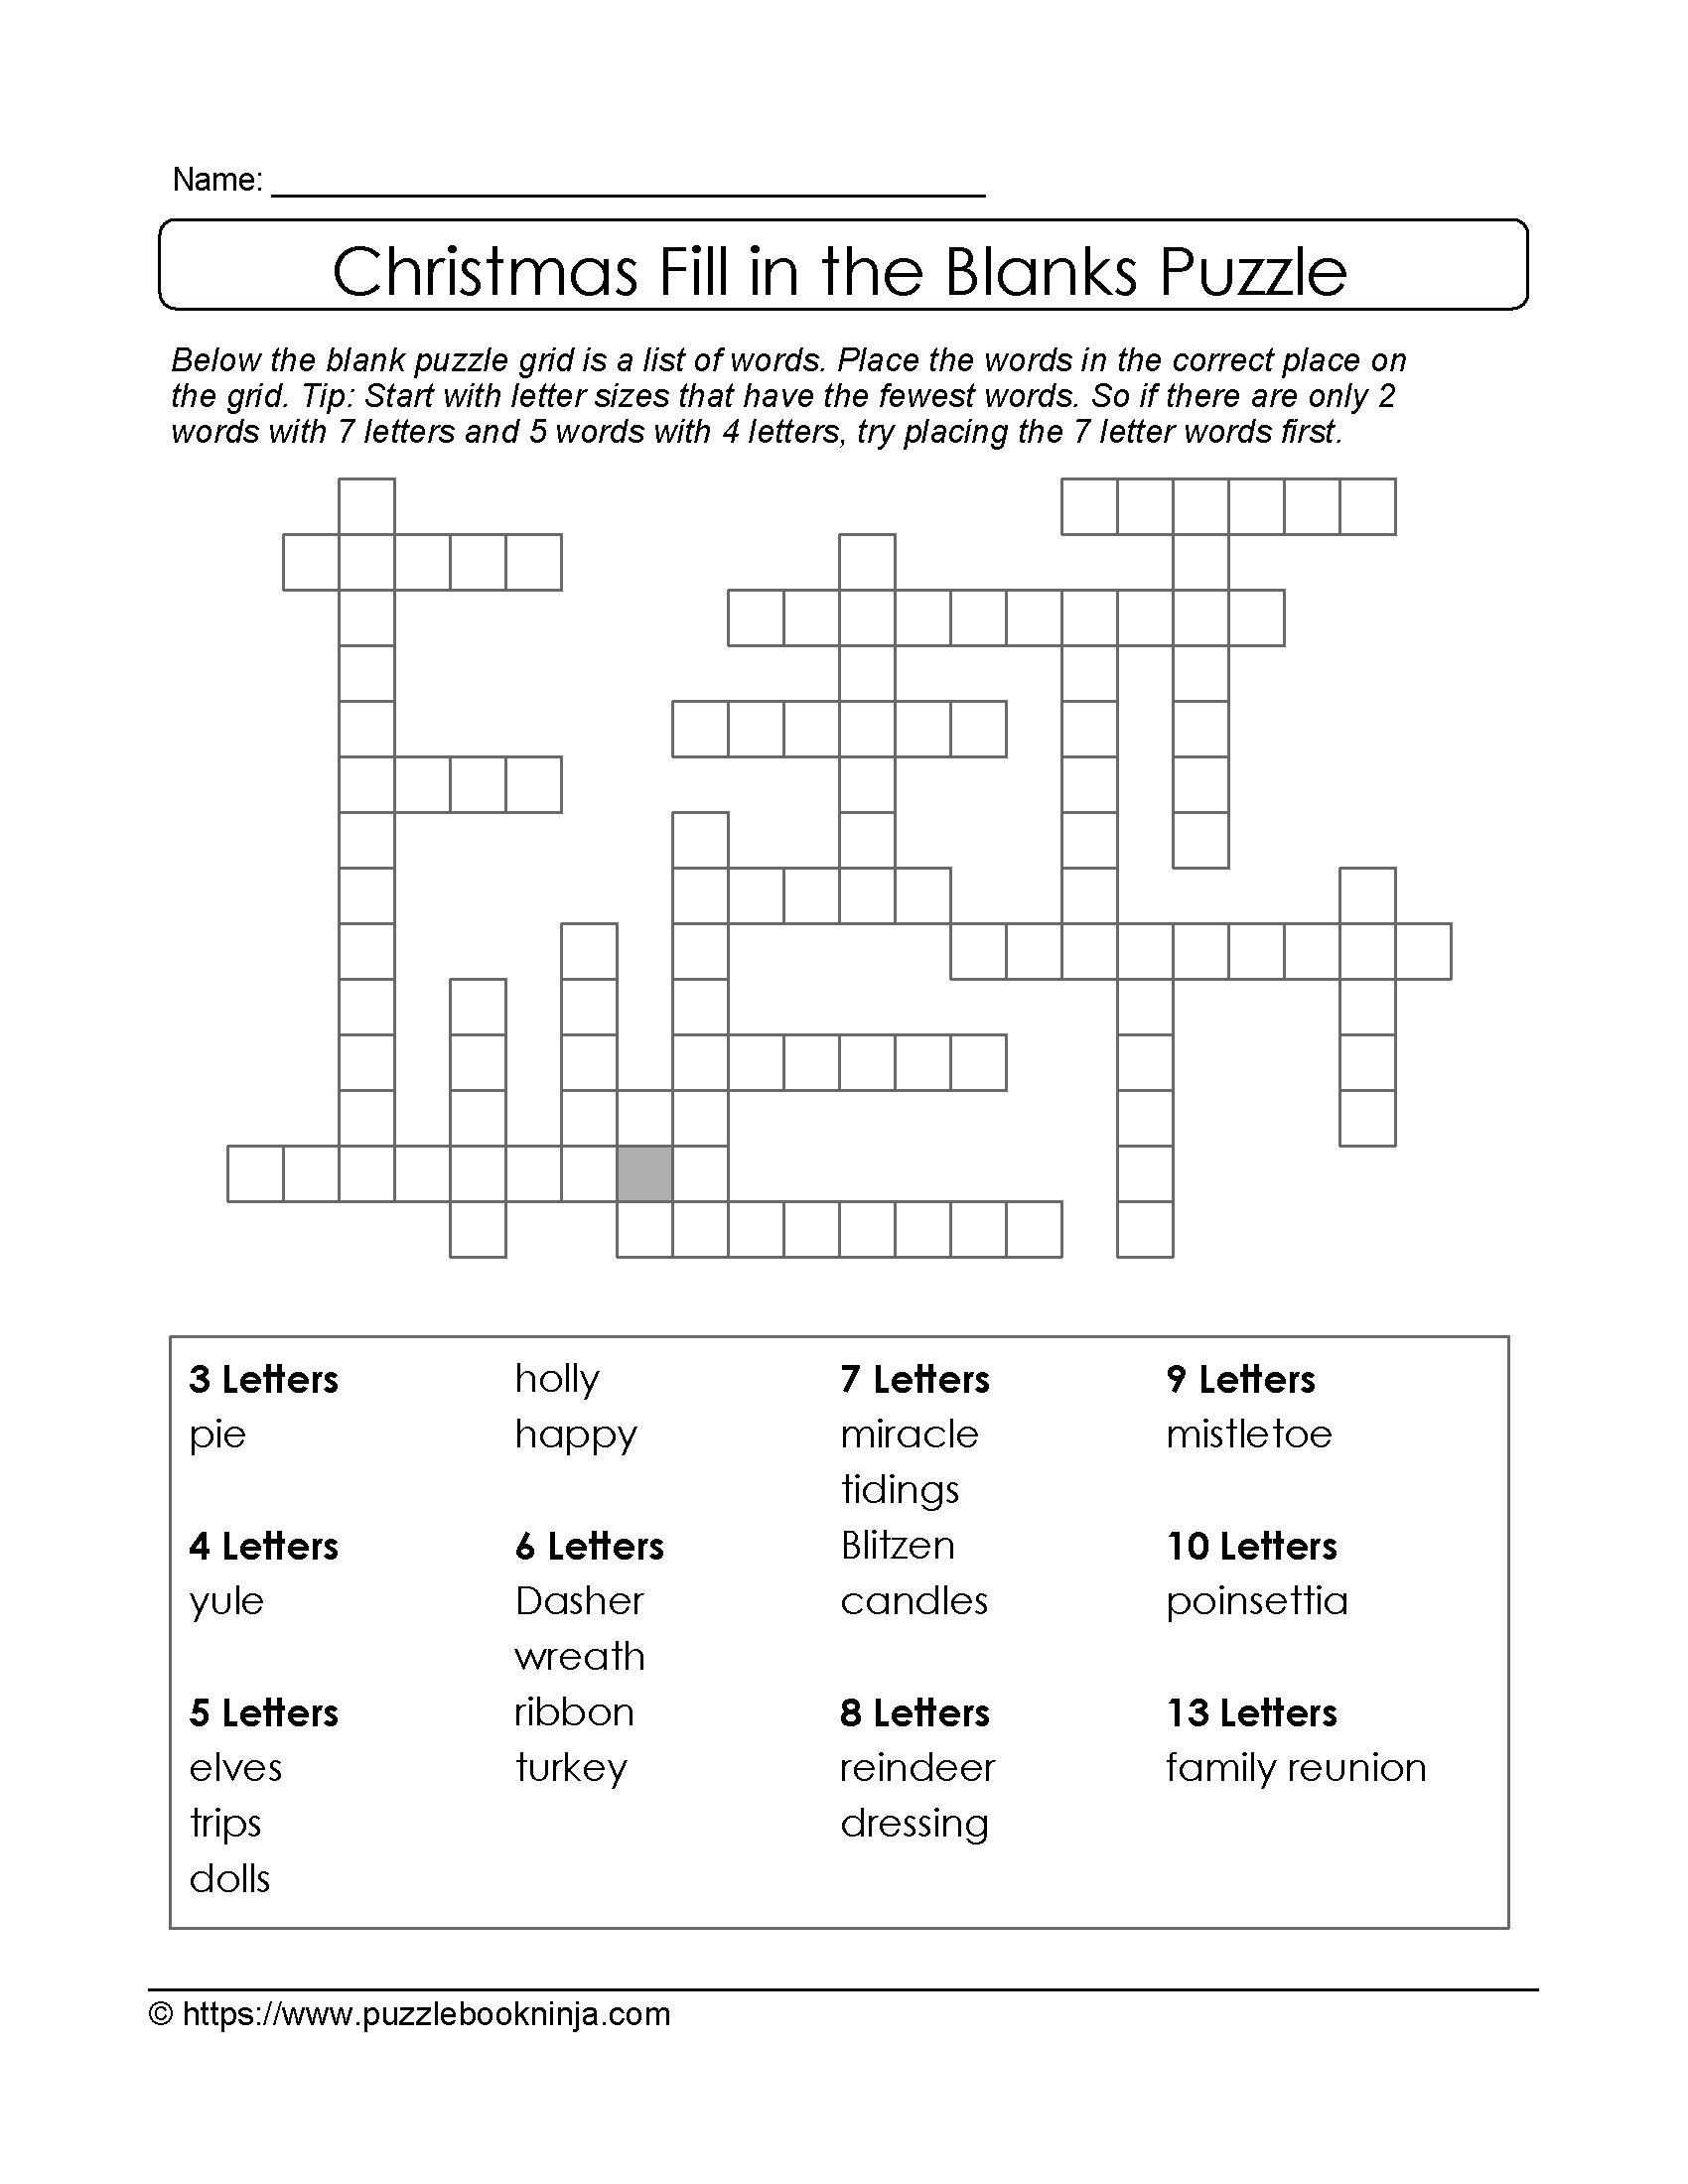 Puzzles To Print. Downloadable Christmas Puzzle. | Science